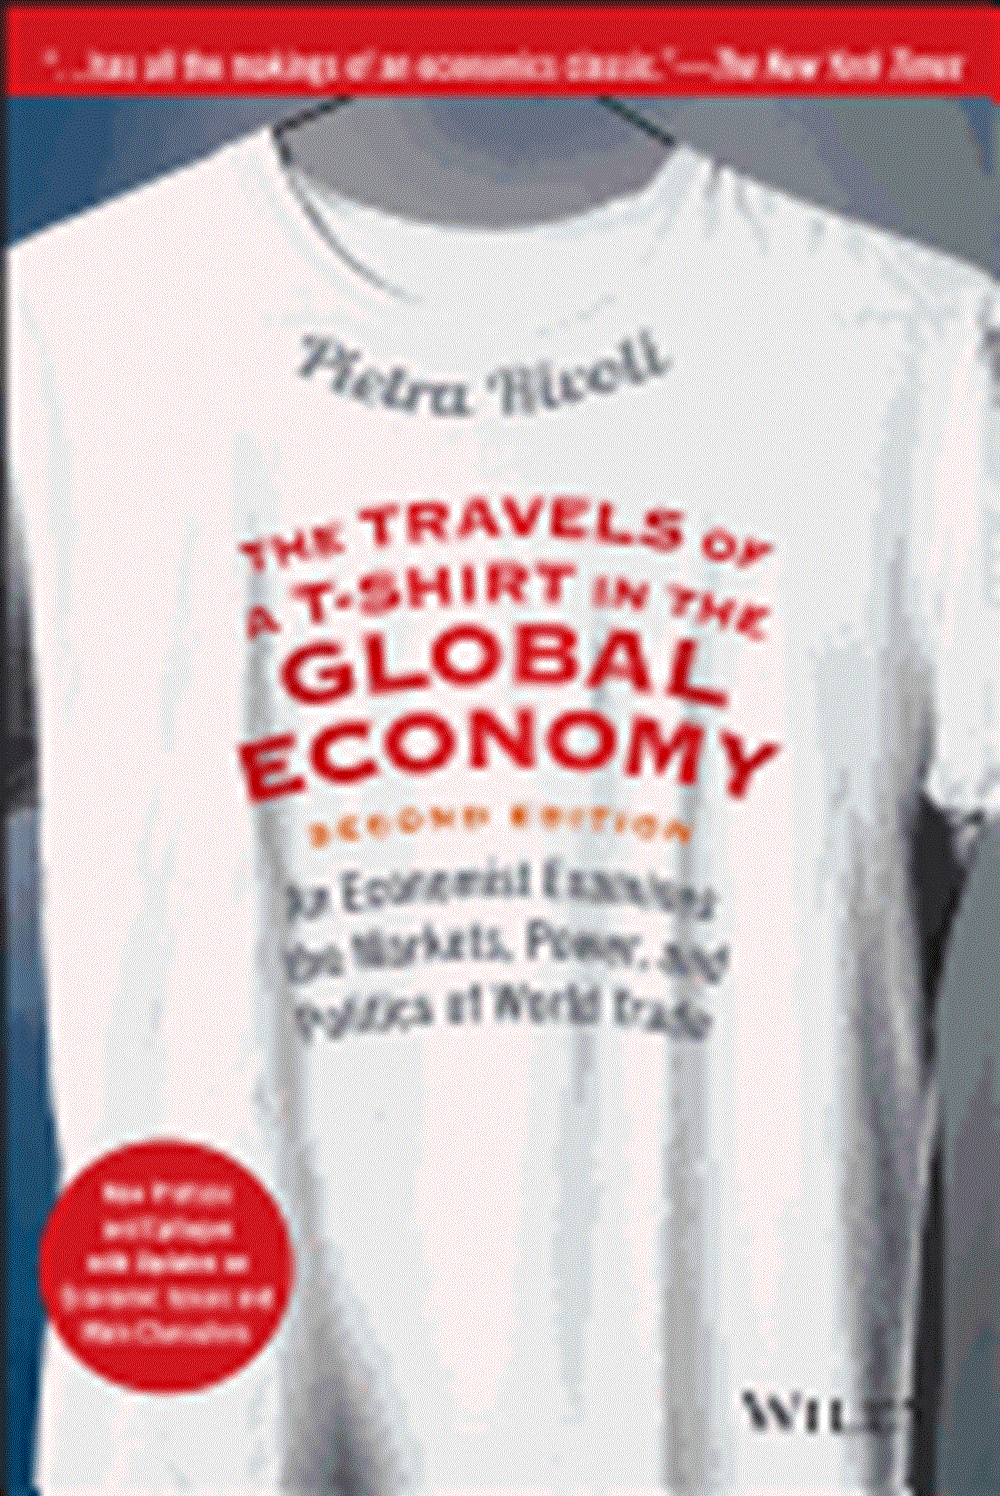 Travels of a T-Shirt in the Global Economy An Economist Examines the Markets, Power, and Politics of